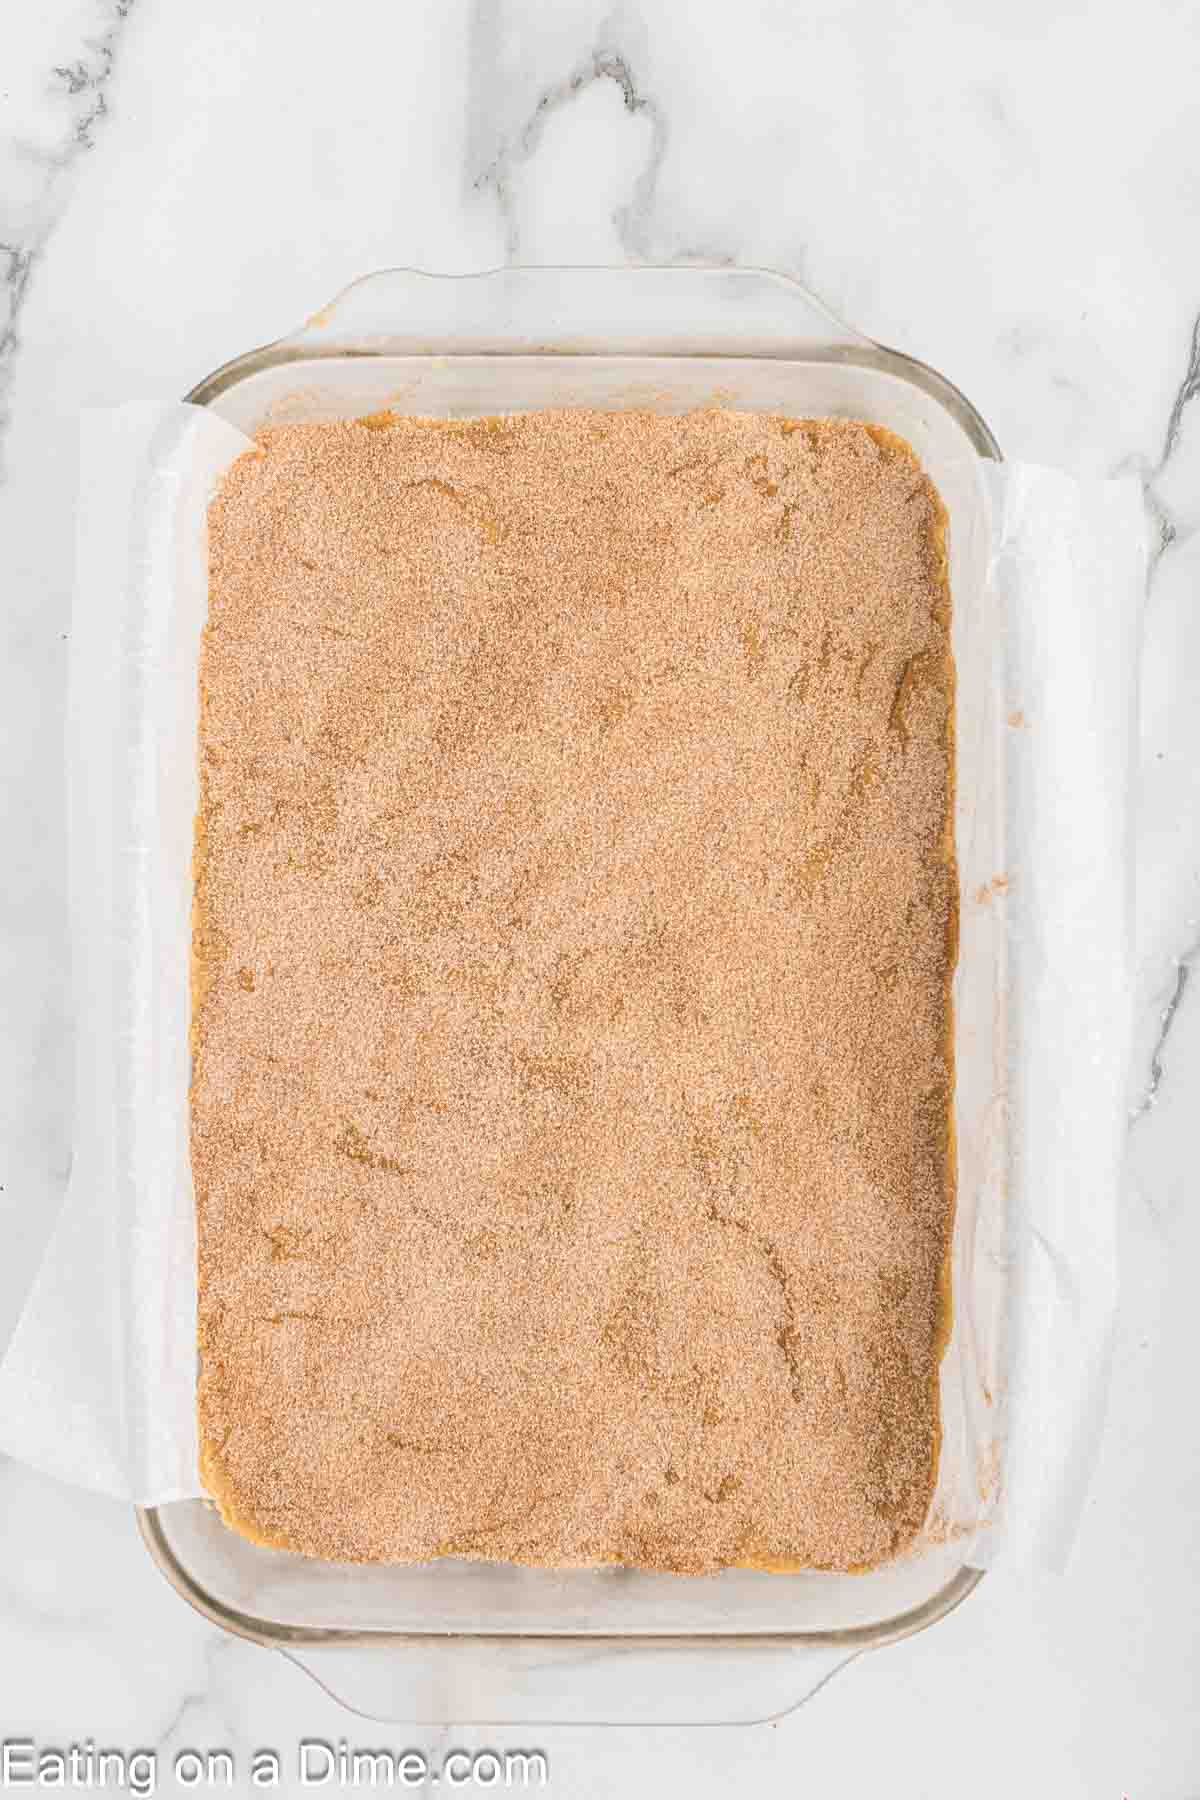 Spreading the blondie batter into the baking dish topped with a cinnamon sugar mixture